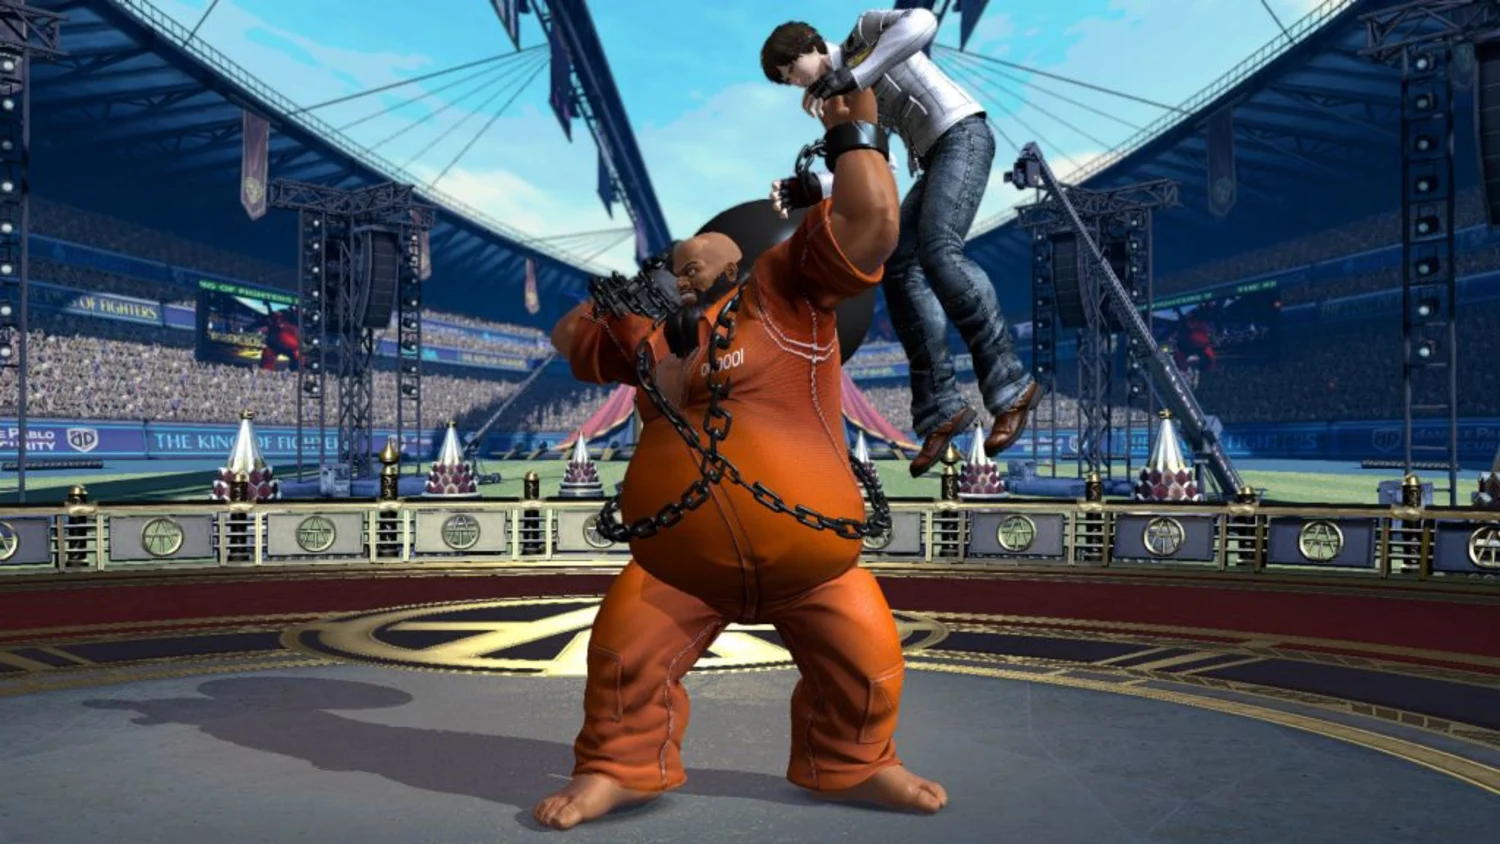 Jogo The King of Fighters XIV - PS4 - Playstation 4 - Jogos PS4